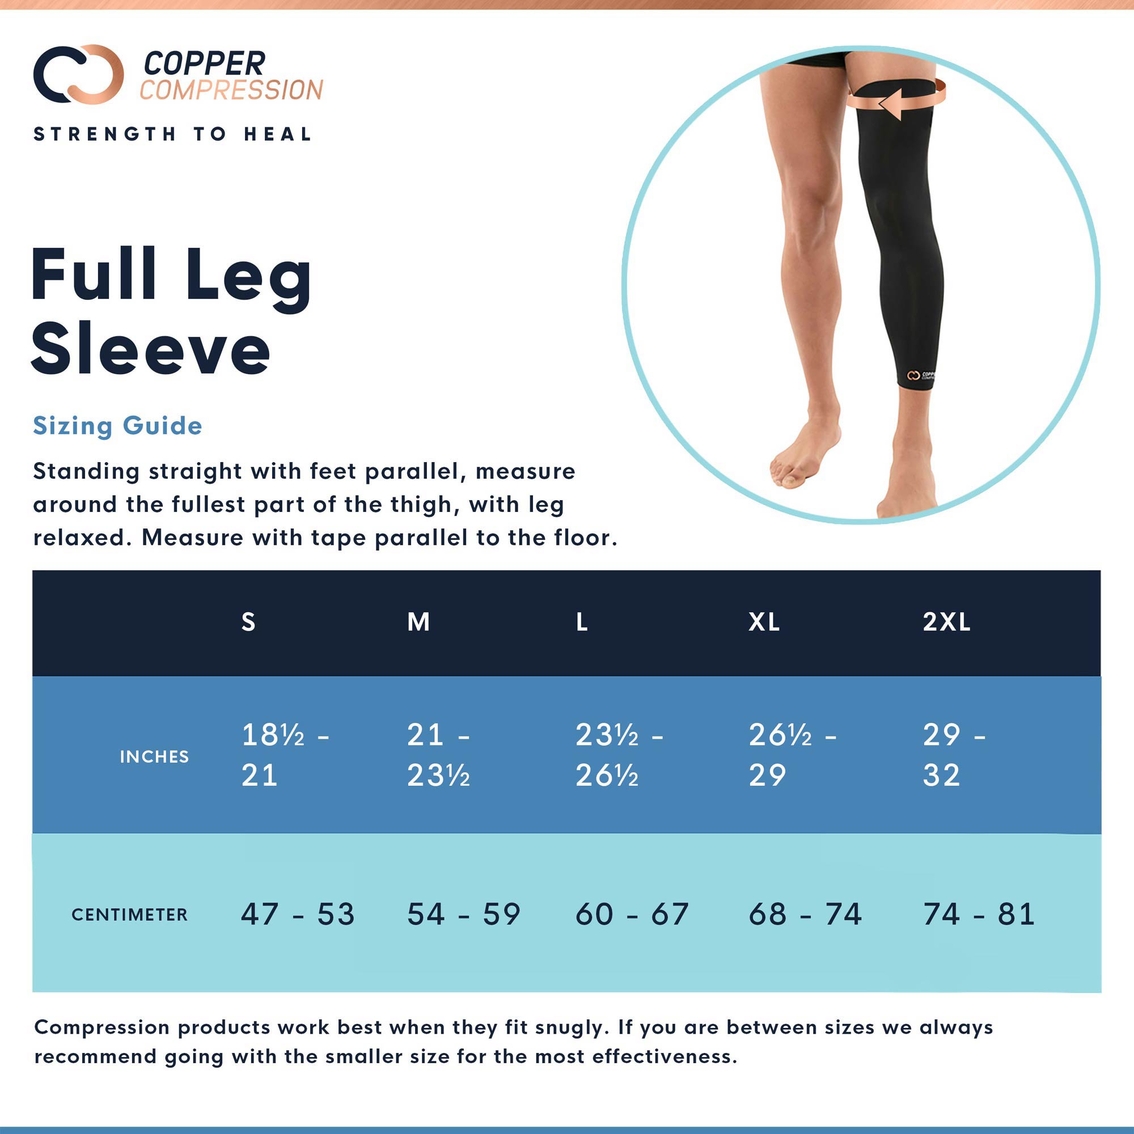 Copper Compression Full Leg Sleeve - Image 2 of 3